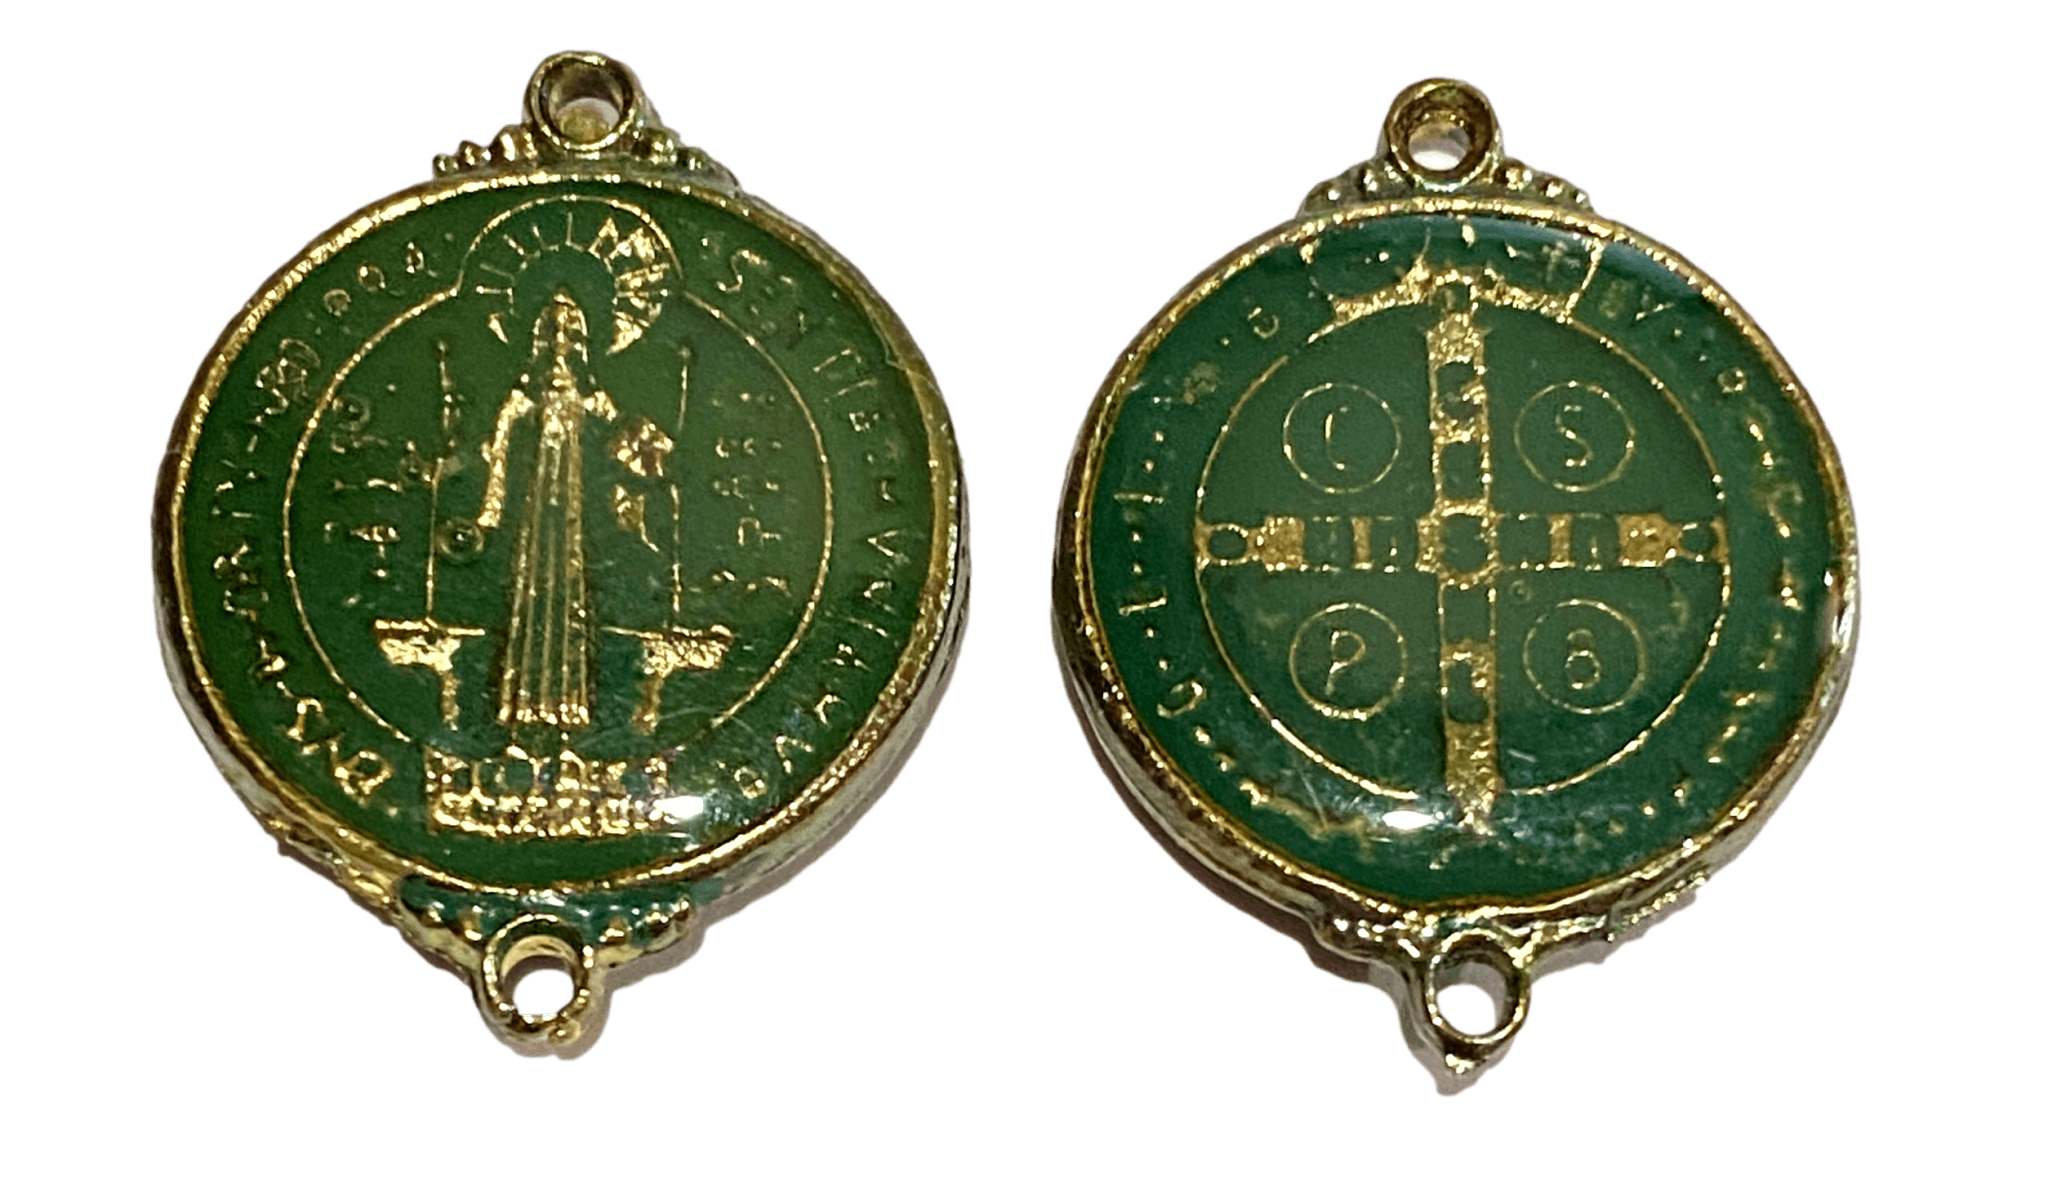 Medal Saint Benedict Gold Green Enamel Seal Italian Oxidized Metal Alloy 1 inch - Ysleta Mission Gift Shop- VOTED El Paso's Best Gift Shop